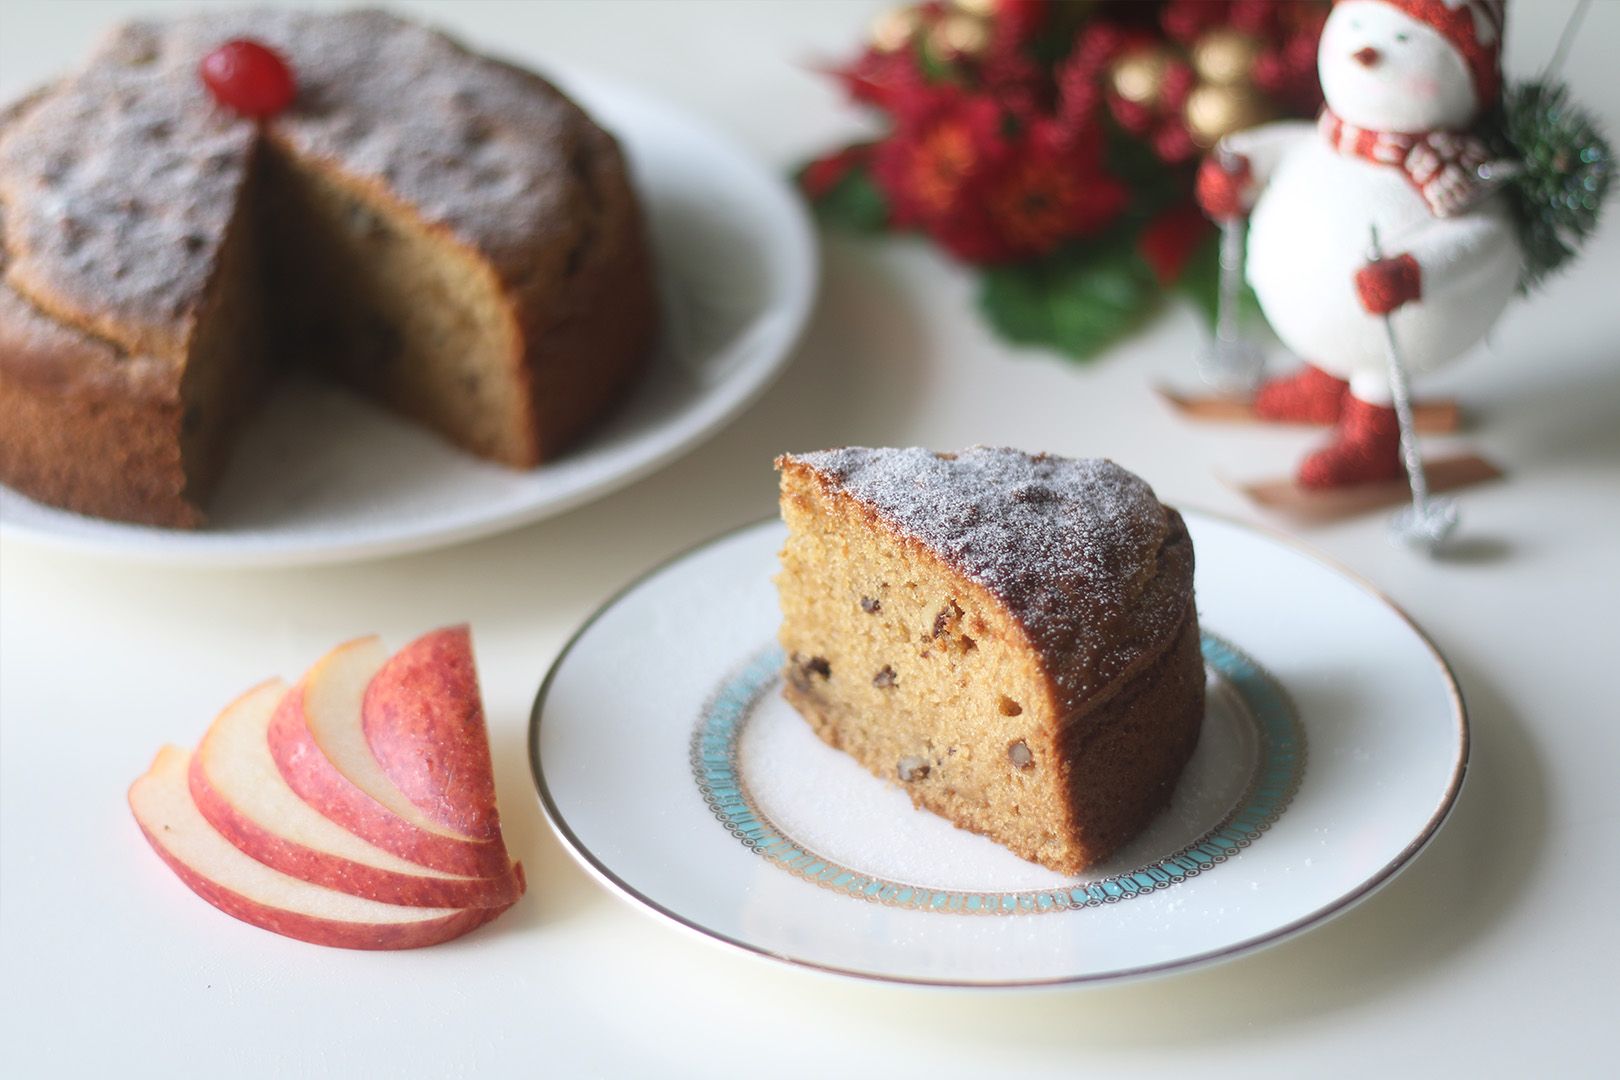 Did you know that the plum cake started off as a porridge? | Mint Lounge